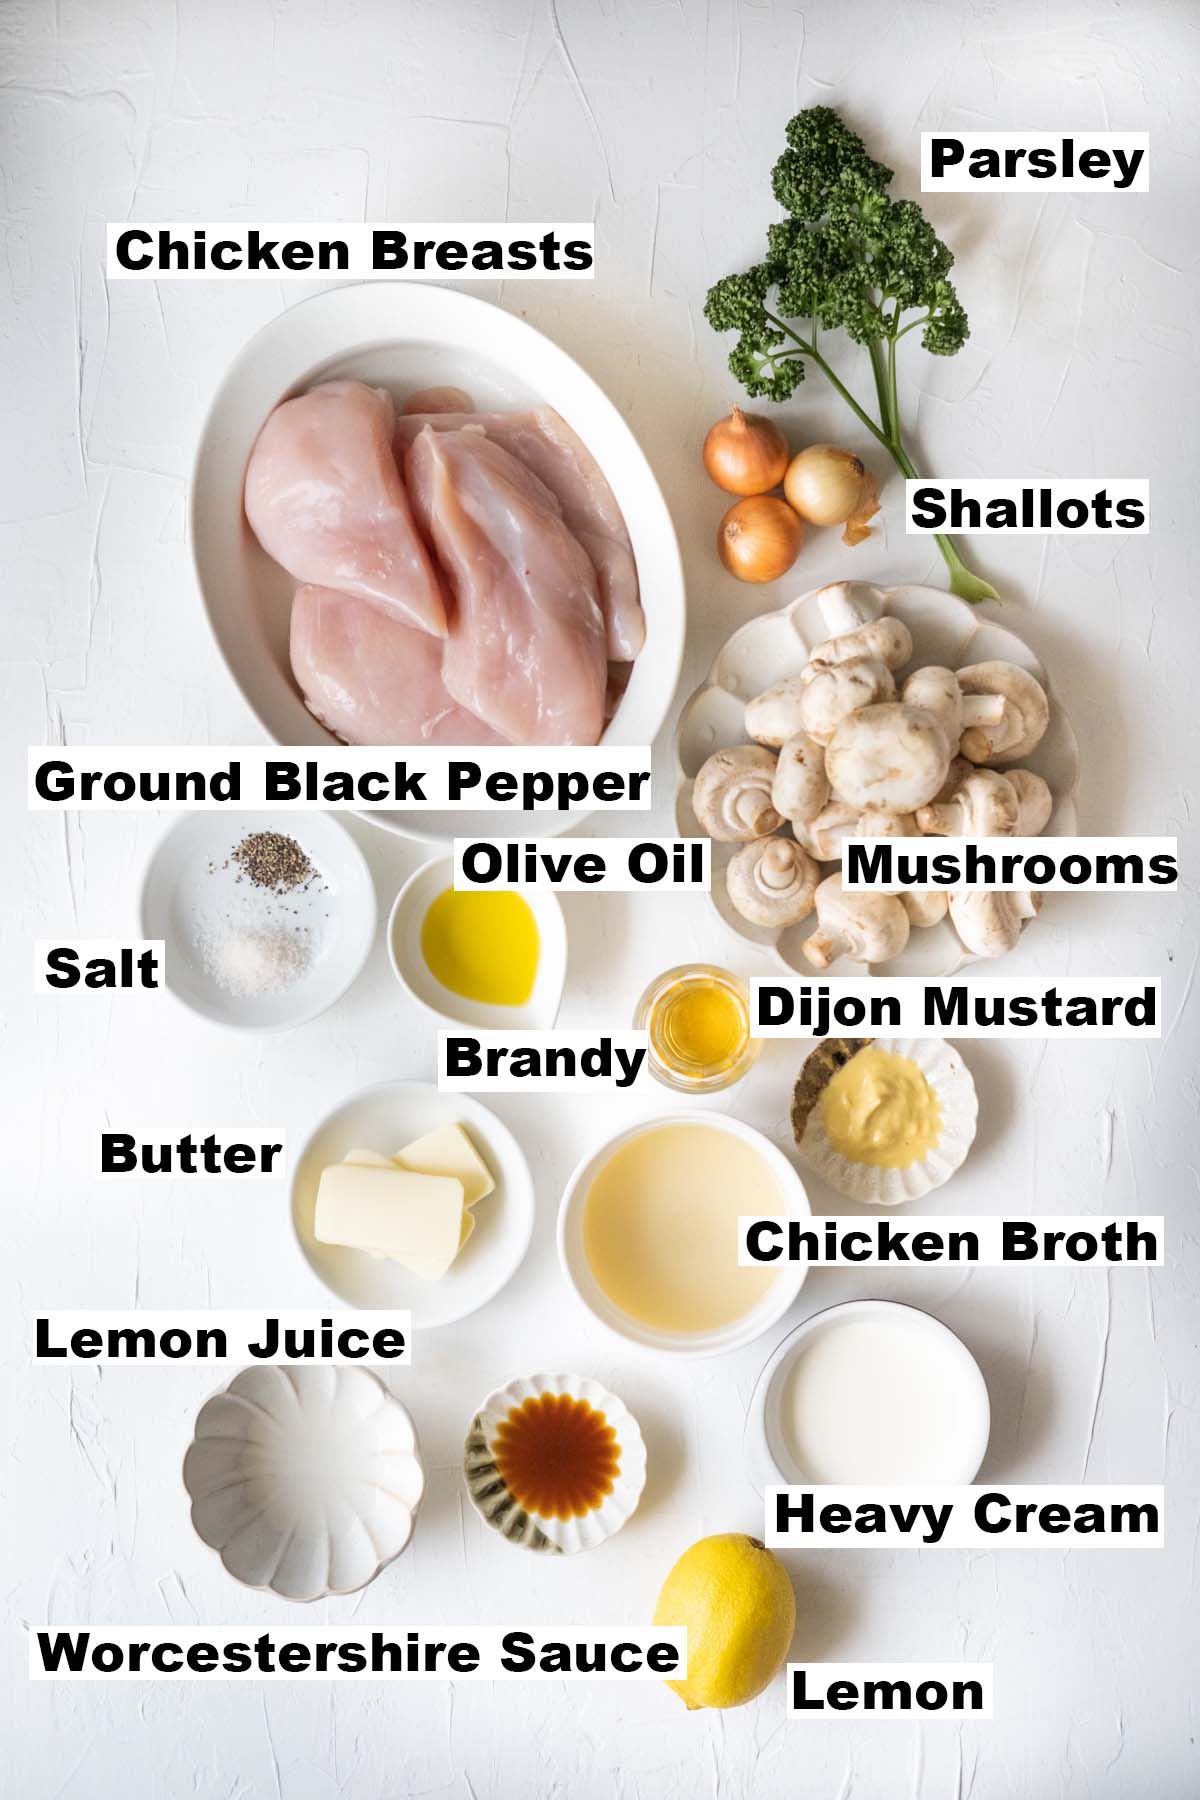 The picture shows all ingredients for Chicken Diane recipe.